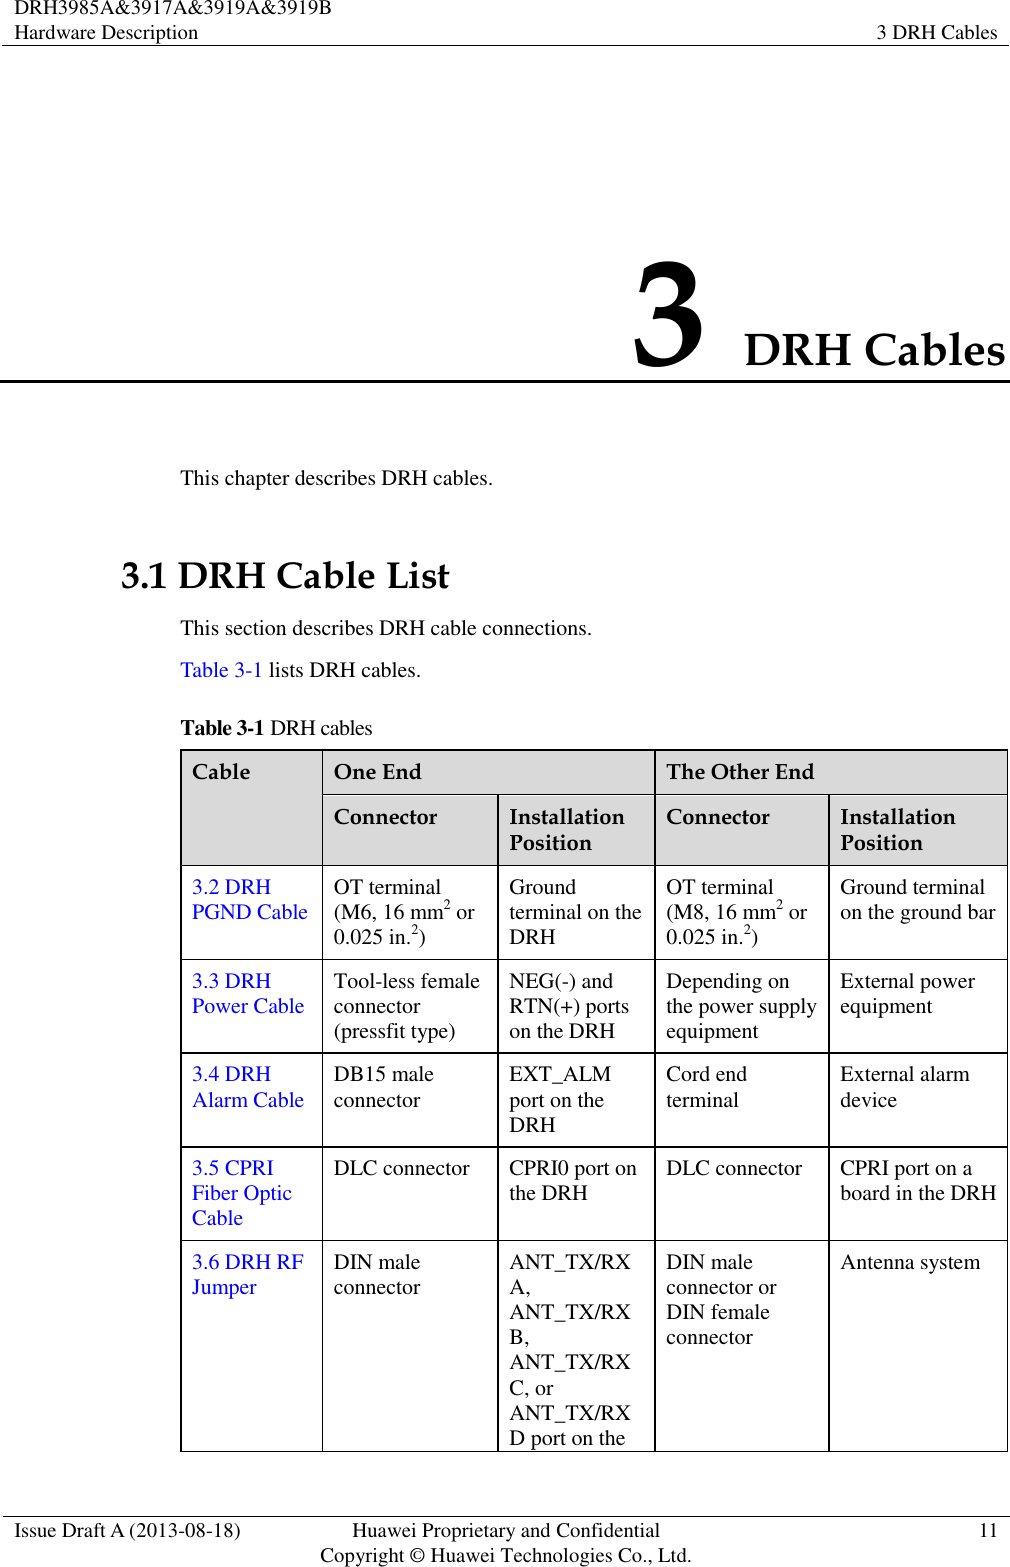 DRH3985A&amp;3917A&amp;3919A&amp;3919B Hardware Description 3 DRH Cables  Issue Draft A (2013-08-18) Huawei Proprietary and Confidential                                     Copyright © Huawei Technologies Co., Ltd. 11  3 DRH Cables This chapter describes DRH cables. 3.1 DRH Cable List This section describes DRH cable connections. Table 3-1 lists DRH cables. Table 3-1 DRH cables Cable One End The Other End Connector Installation Position Connector Installation Position 3.2 DRH PGND Cable OT terminal (M6, 16 mm2 or 0.025 in.2) Ground terminal on the DRH OT terminal (M8, 16 mm2 or 0.025 in.2) Ground terminal on the ground bar 3.3 DRH Power Cable Tool-less female connector (pressfit type) NEG(-) and RTN(+) ports on the DRH Depending on the power supply equipment External power equipment 3.4 DRH Alarm Cable DB15 male connector EXT_ALM port on the DRH Cord end terminal External alarm device 3.5 CPRI Fiber Optic Cable DLC connector CPRI0 port on the DRH DLC connector CPRI port on a board in the DRH 3.6 DRH RF Jumper DIN male connector ANT_TX/RXA, ANT_TX/RXB, ANT_TX/RXC, or ANT_TX/RXD port on the DIN male connector or DIN female connector Antenna system 